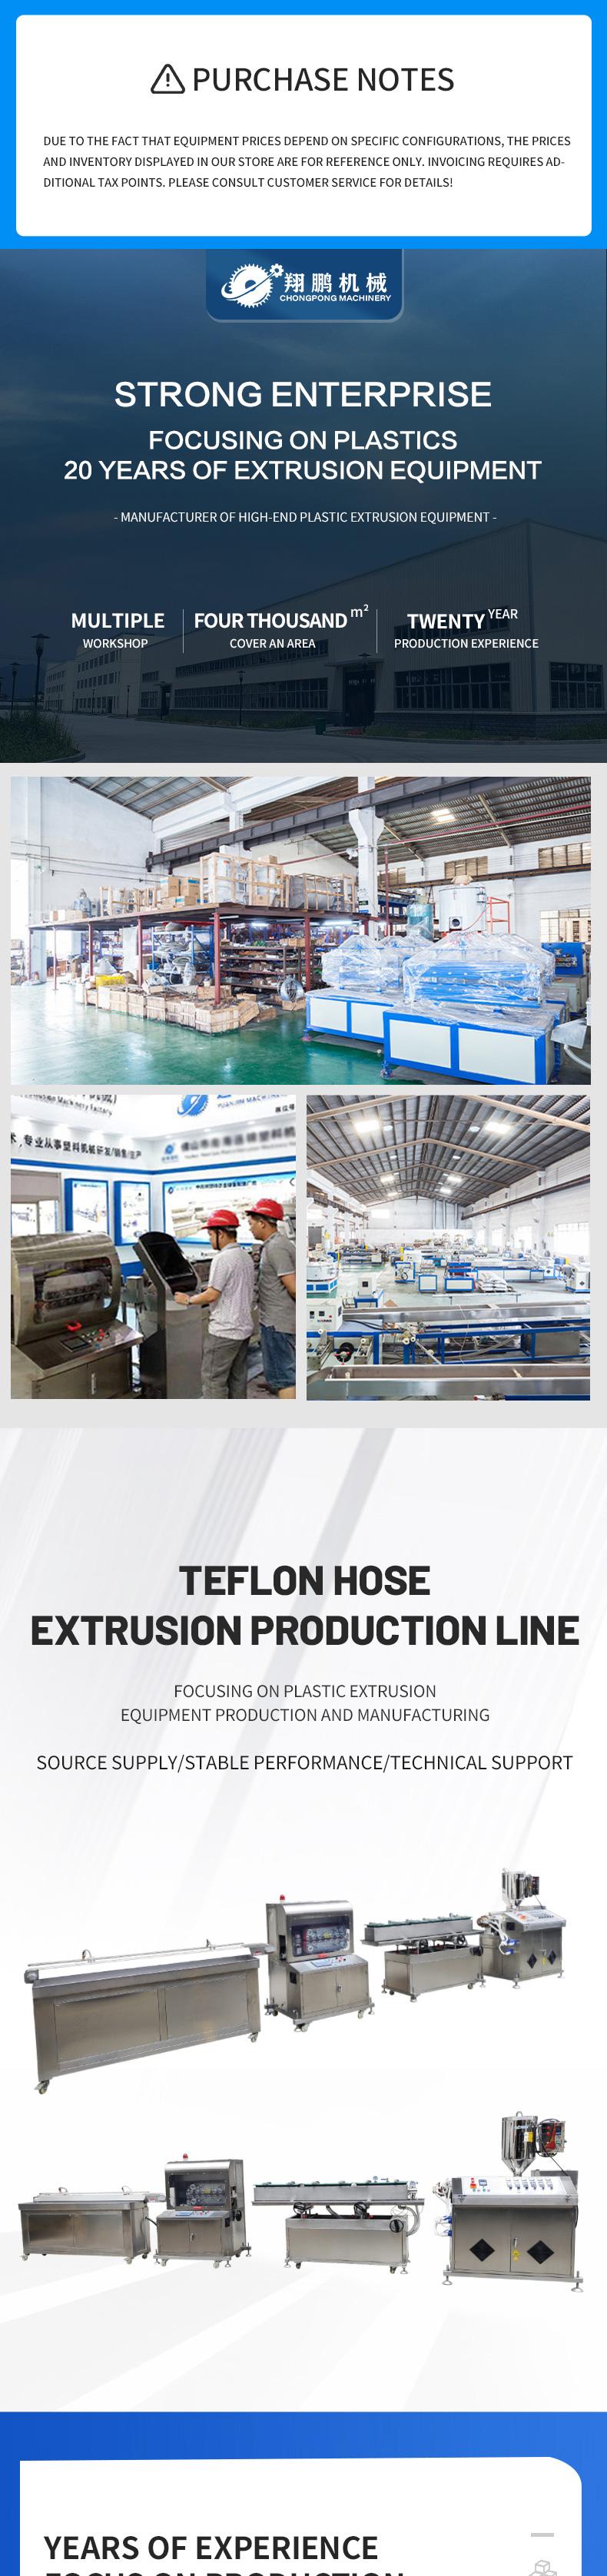 Xiangpeng PFA and FEP pipe extrusion production line, stainless steel PFA pipe extruder, PTFE pipe